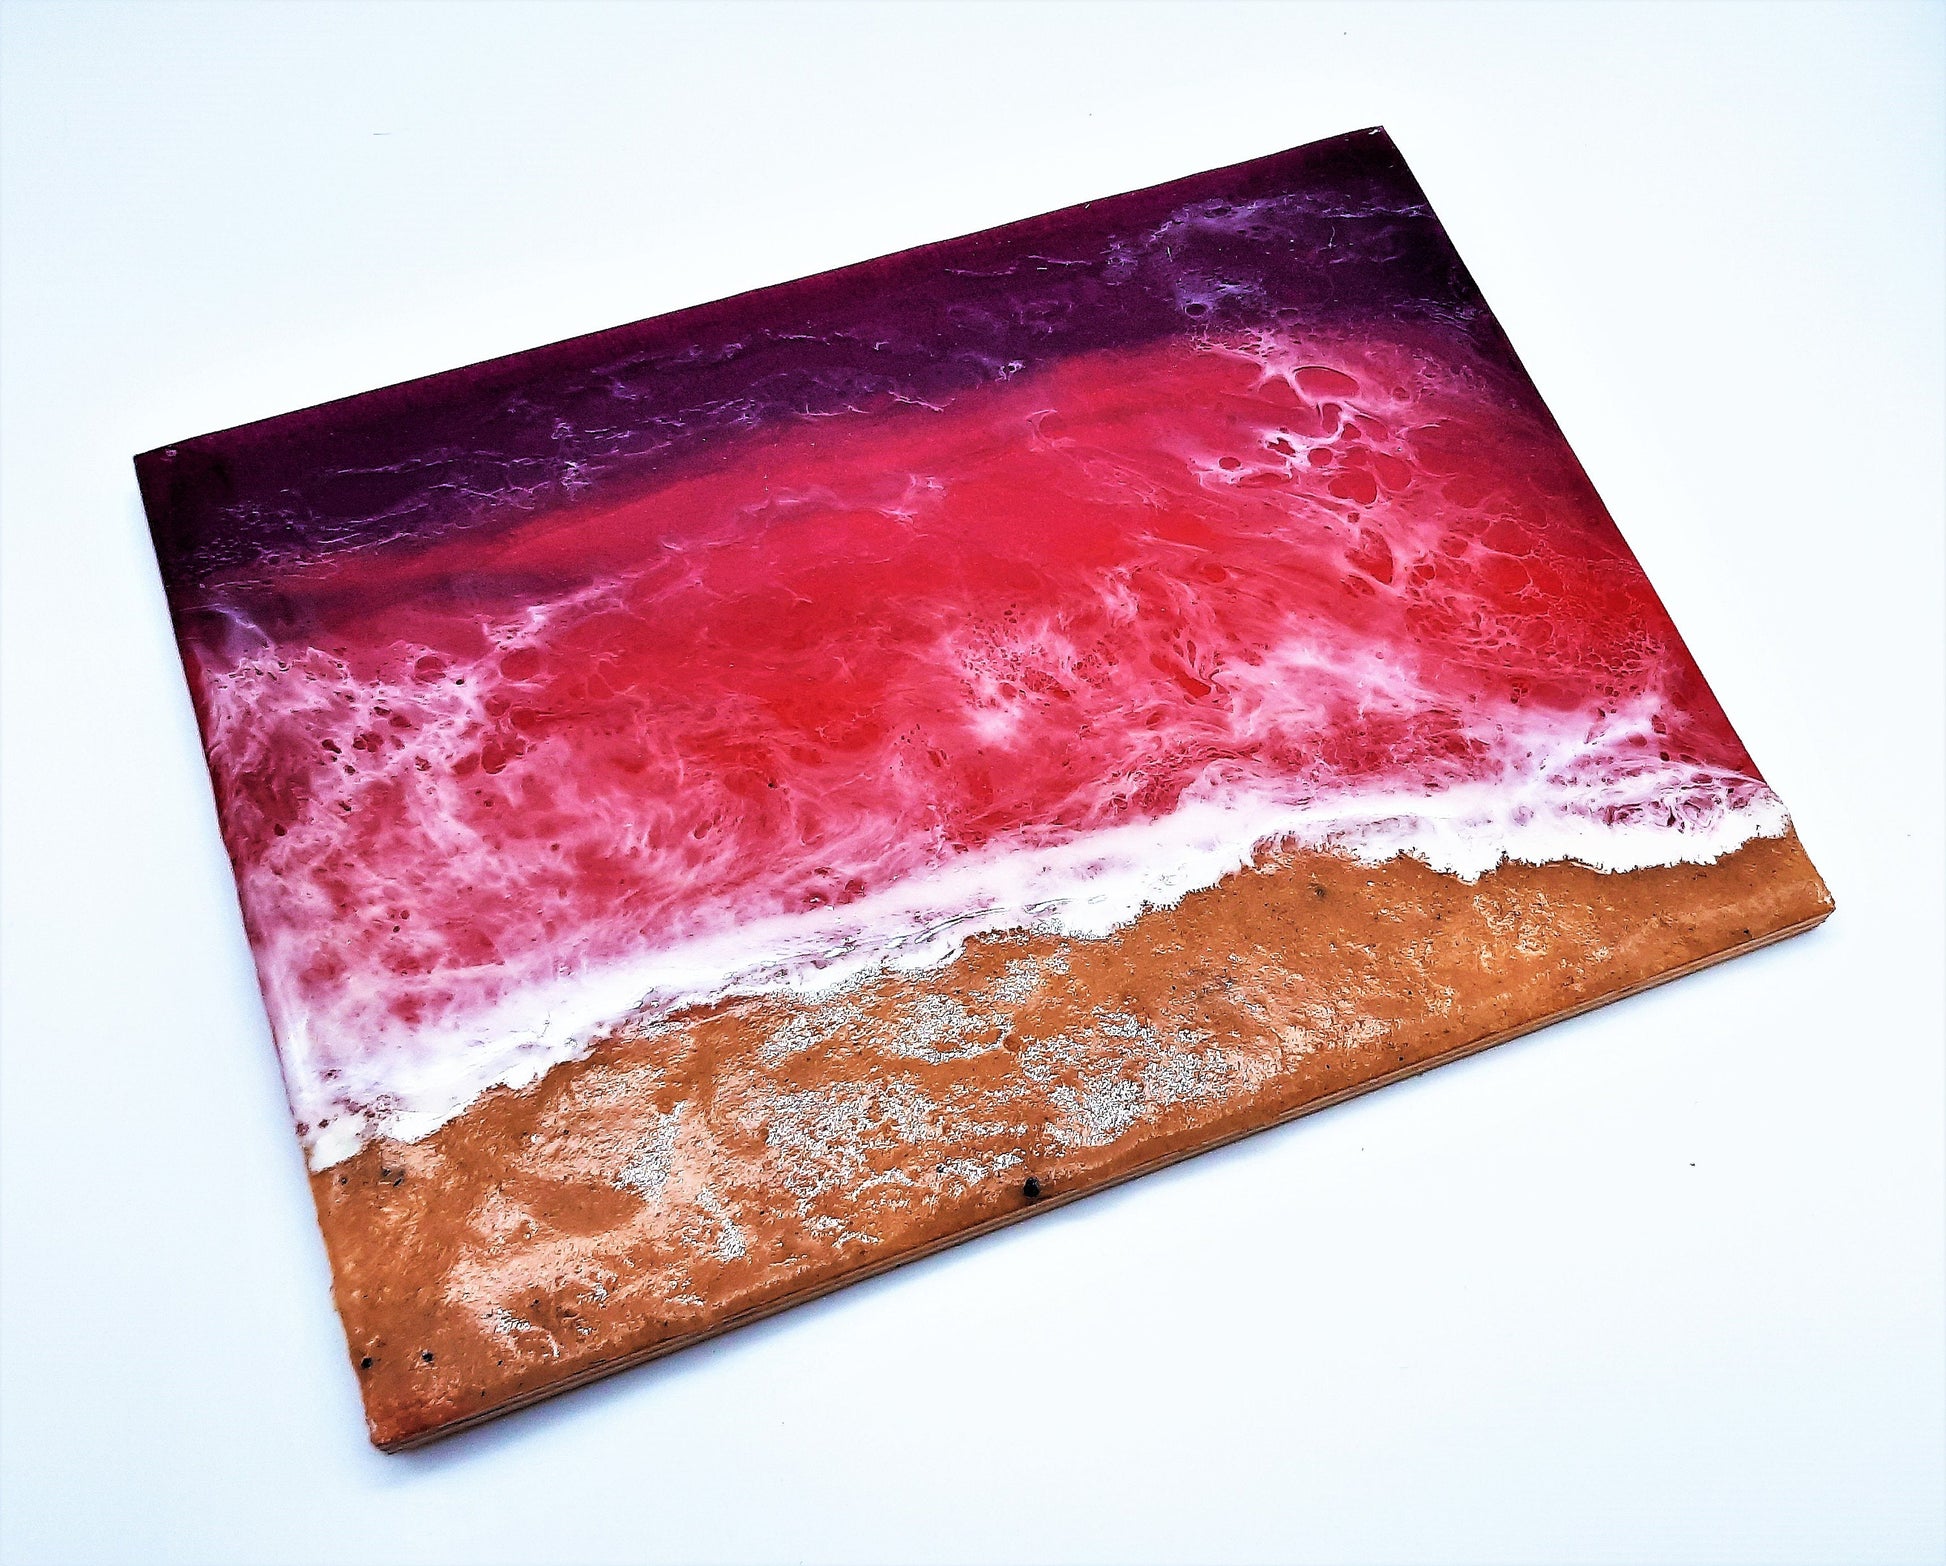 Handpainted Eco-Friendly Epoxy Resin Seascape Coastal Beach Scene, Purples and Pinks, Made w/ Real Sand, Painted on 8" x 6" Wood